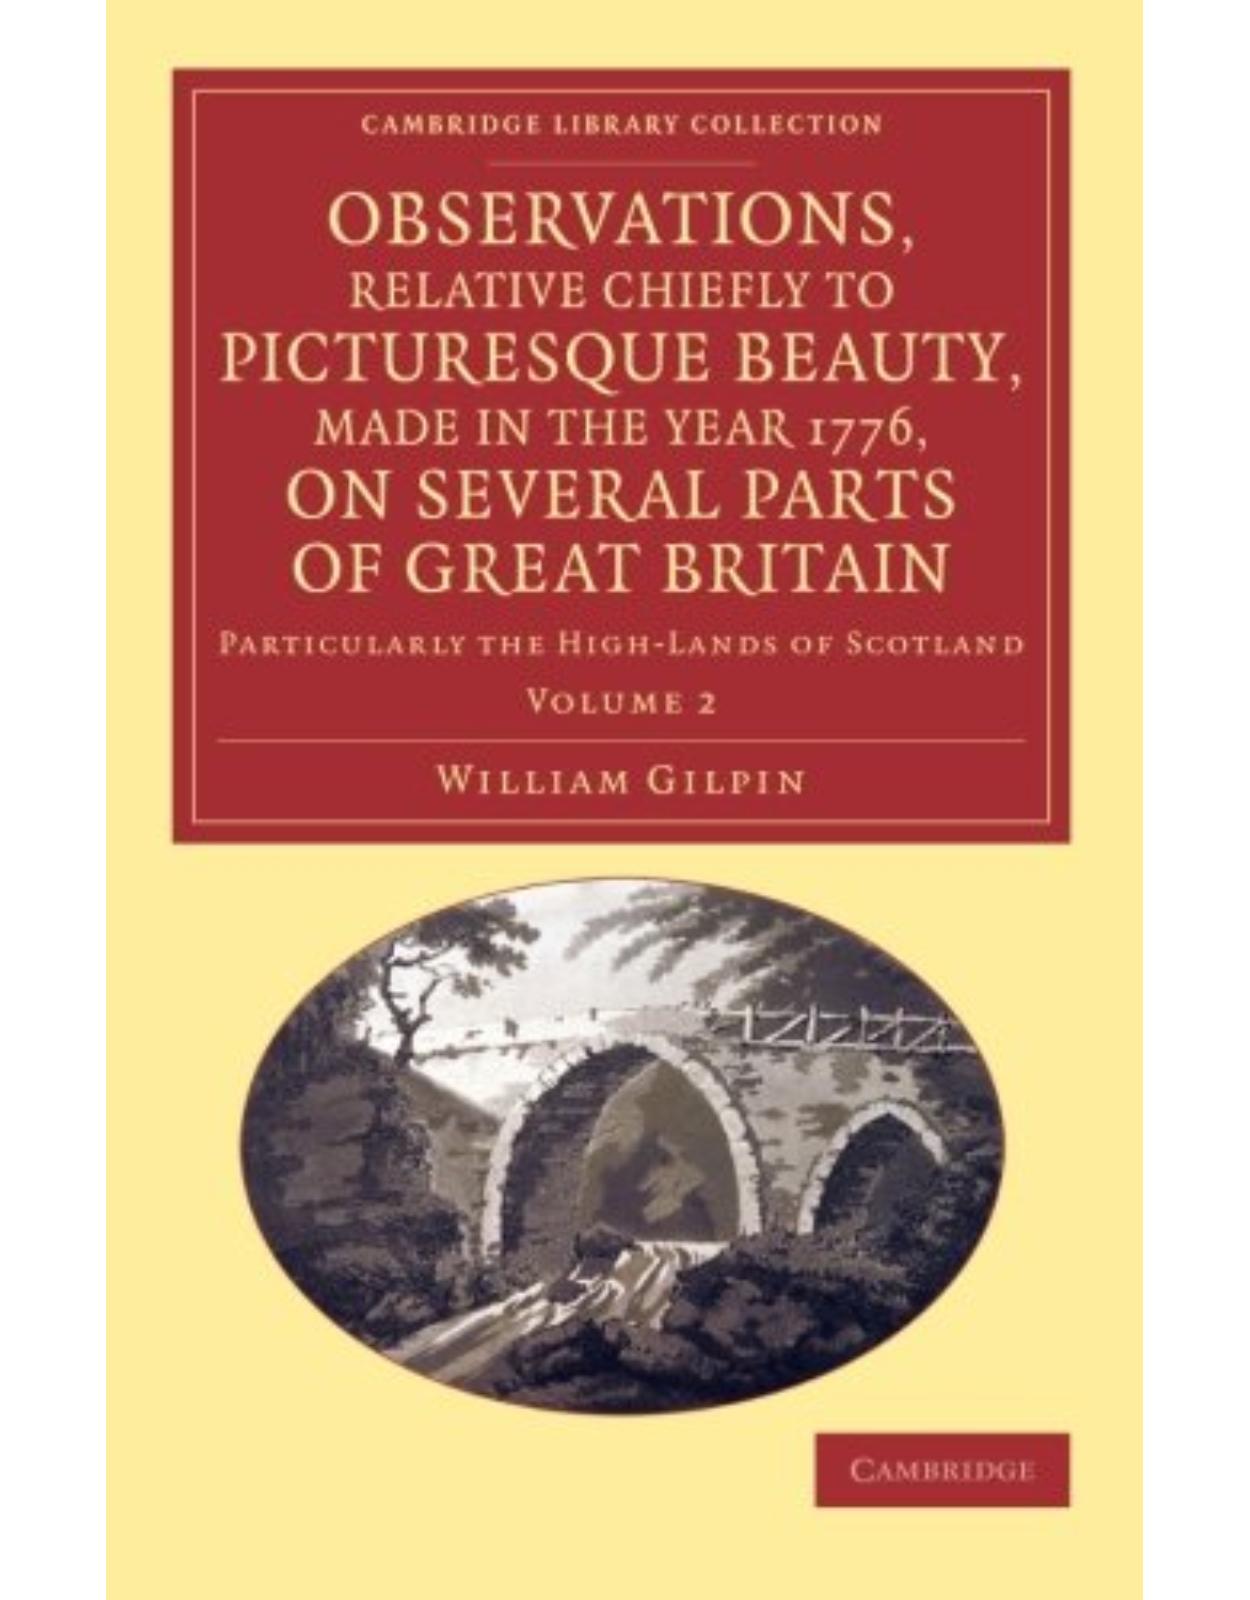 Observations, Relative Chiefly to Picturesque Beauty, Made in the Year 1776, on Several Parts of Great Britain: Particularly the High-Lands of Scotland (Volume 2)